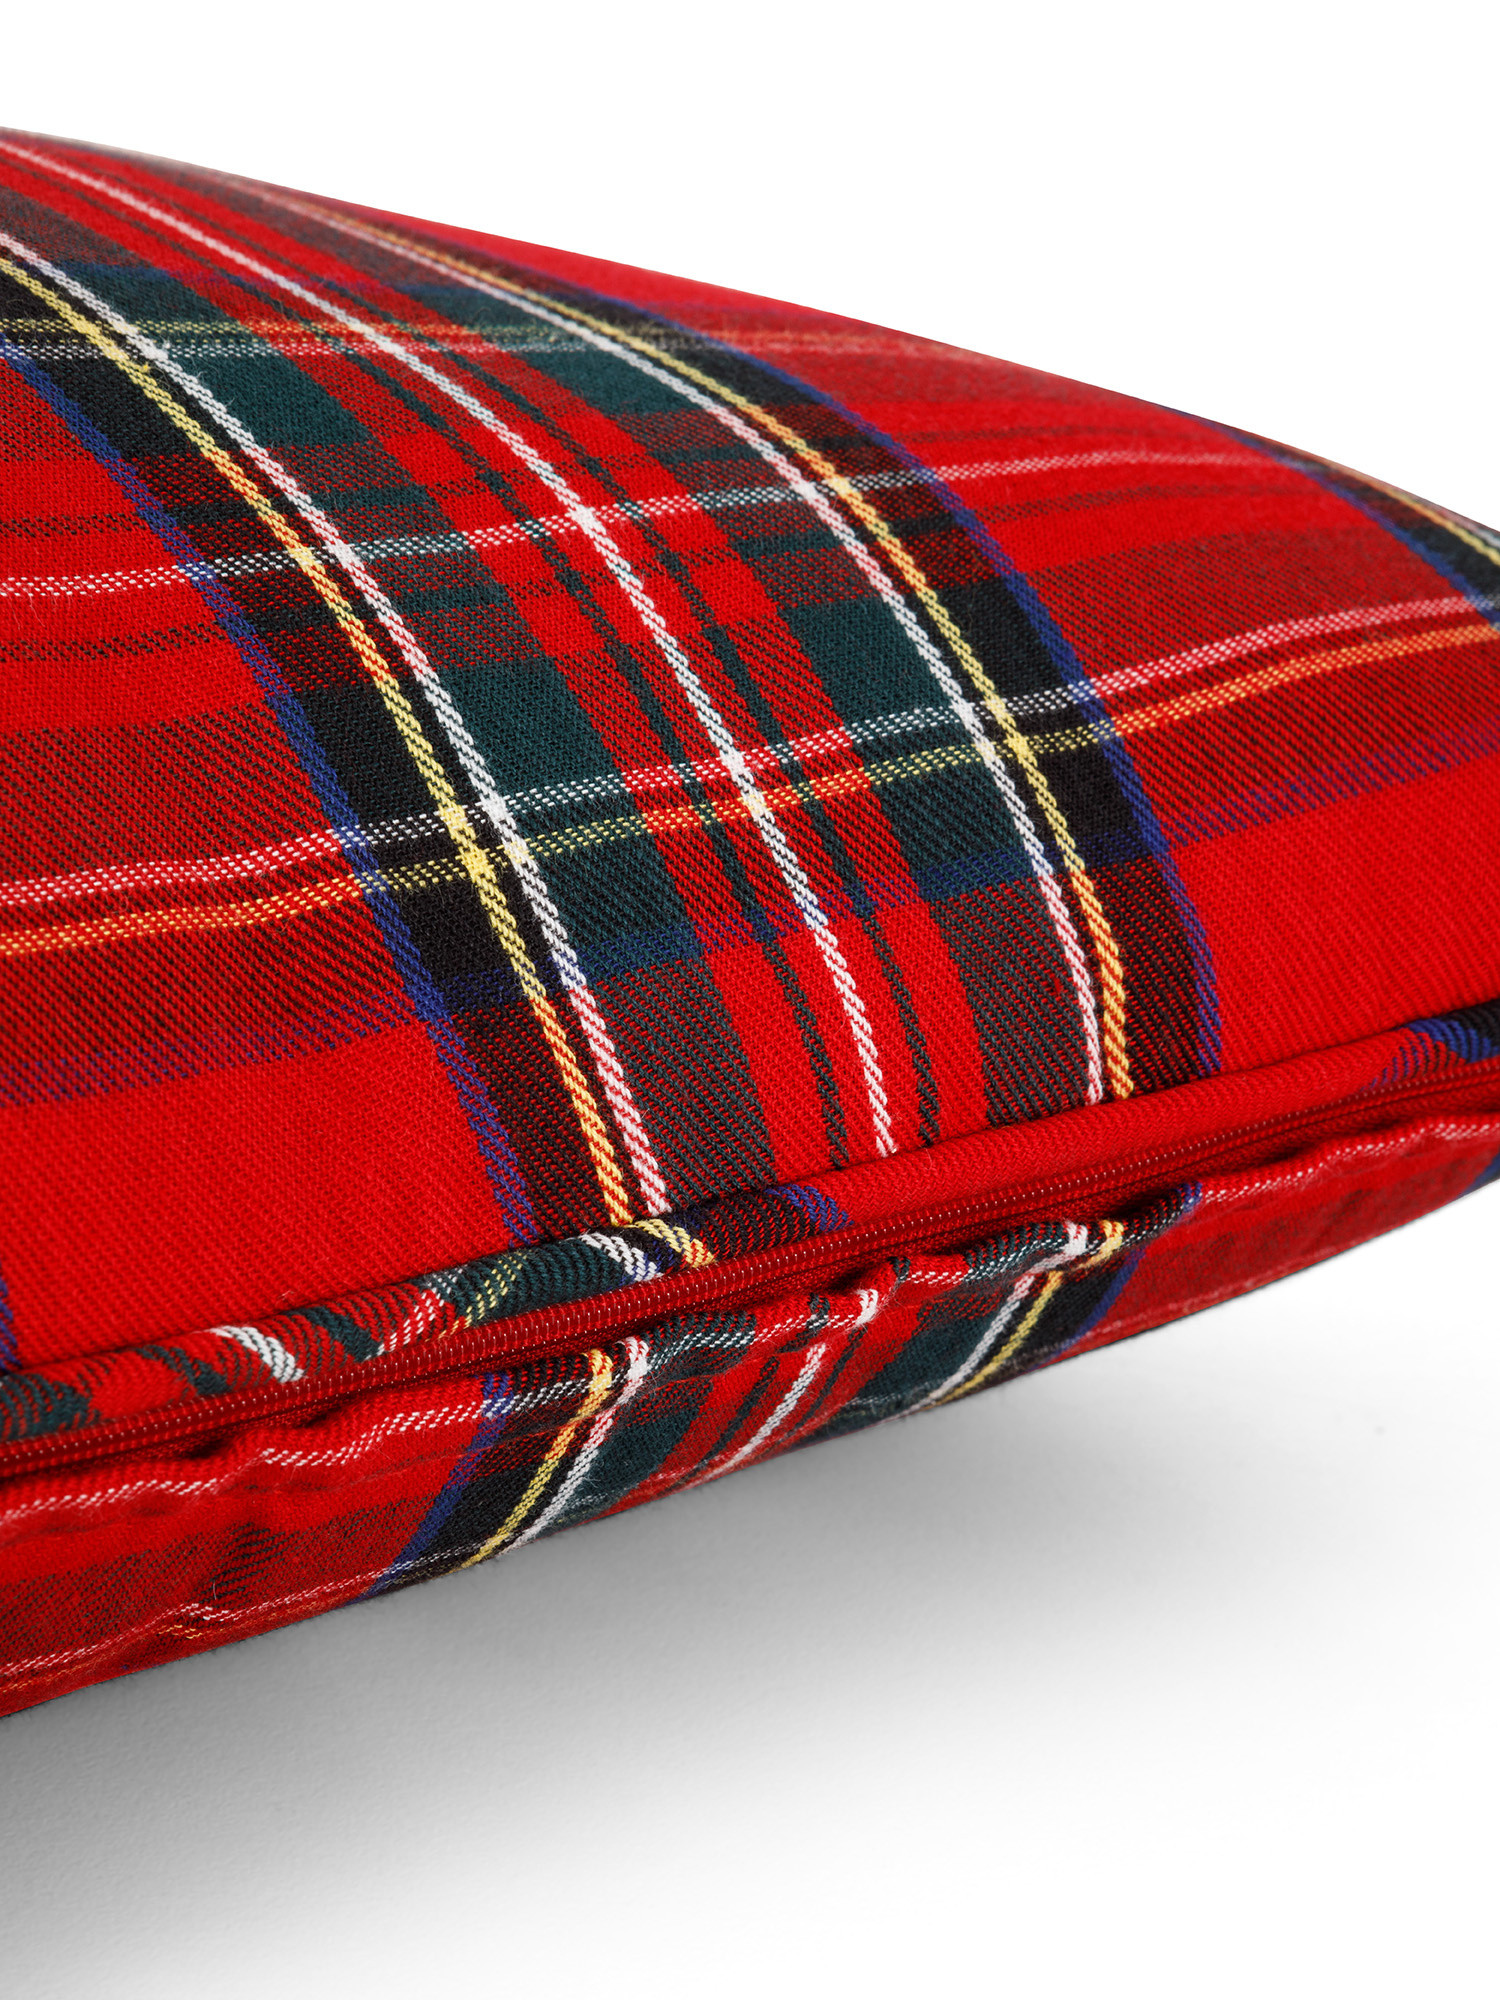 Cuscino in tartan 45x45 cm, Rosso, large image number 2